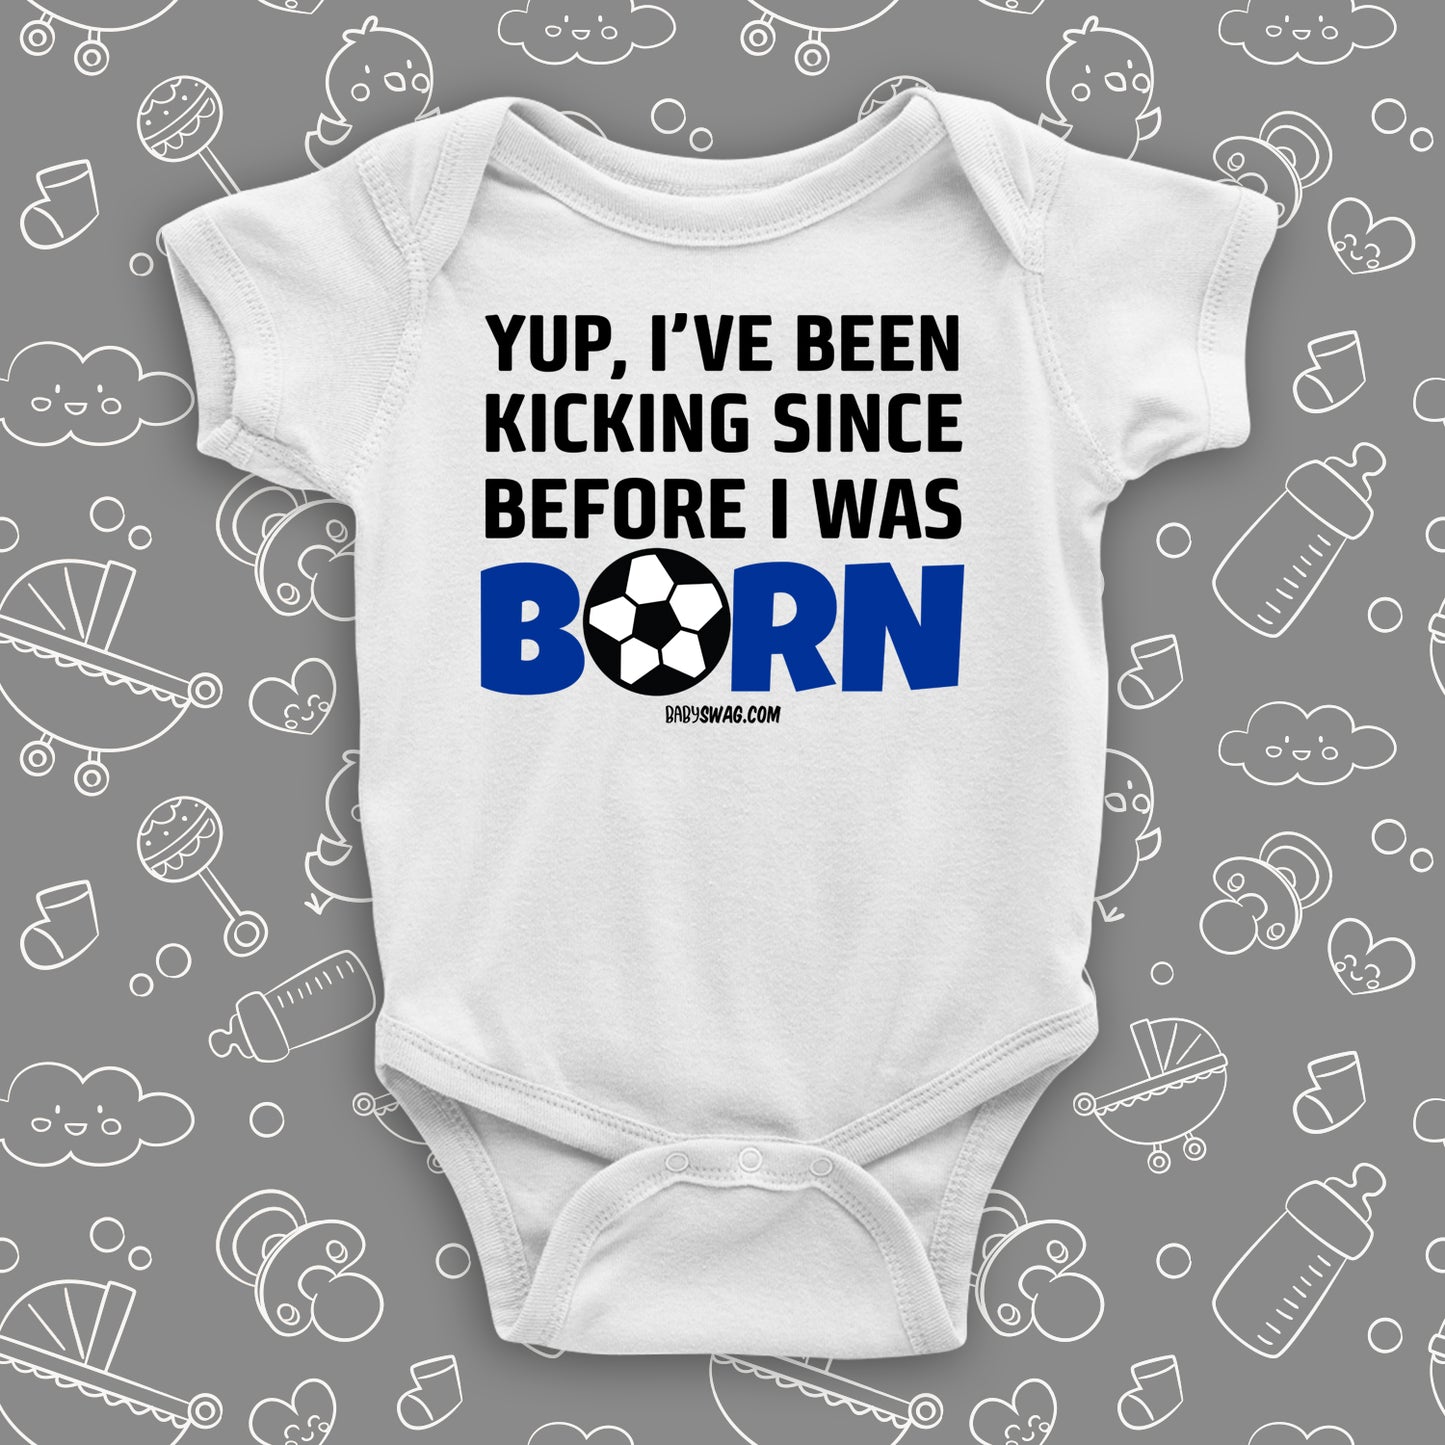 Funny baby boy onesies with saying "Yup, I've Been Kicking Since Before I Was Born" in white.